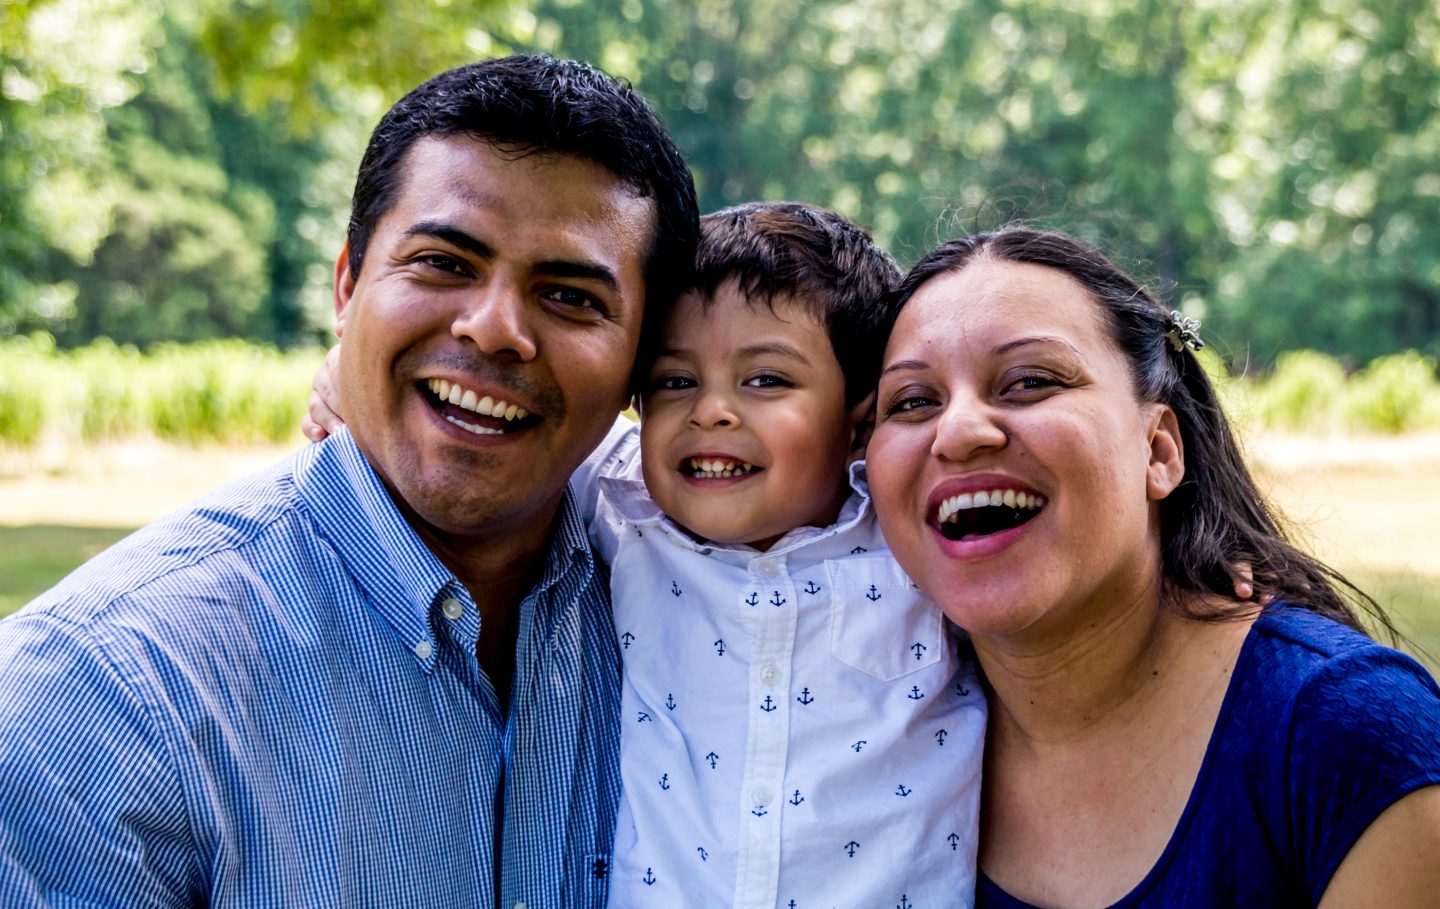 Latino family of three, parents holding young son, all with big smiles